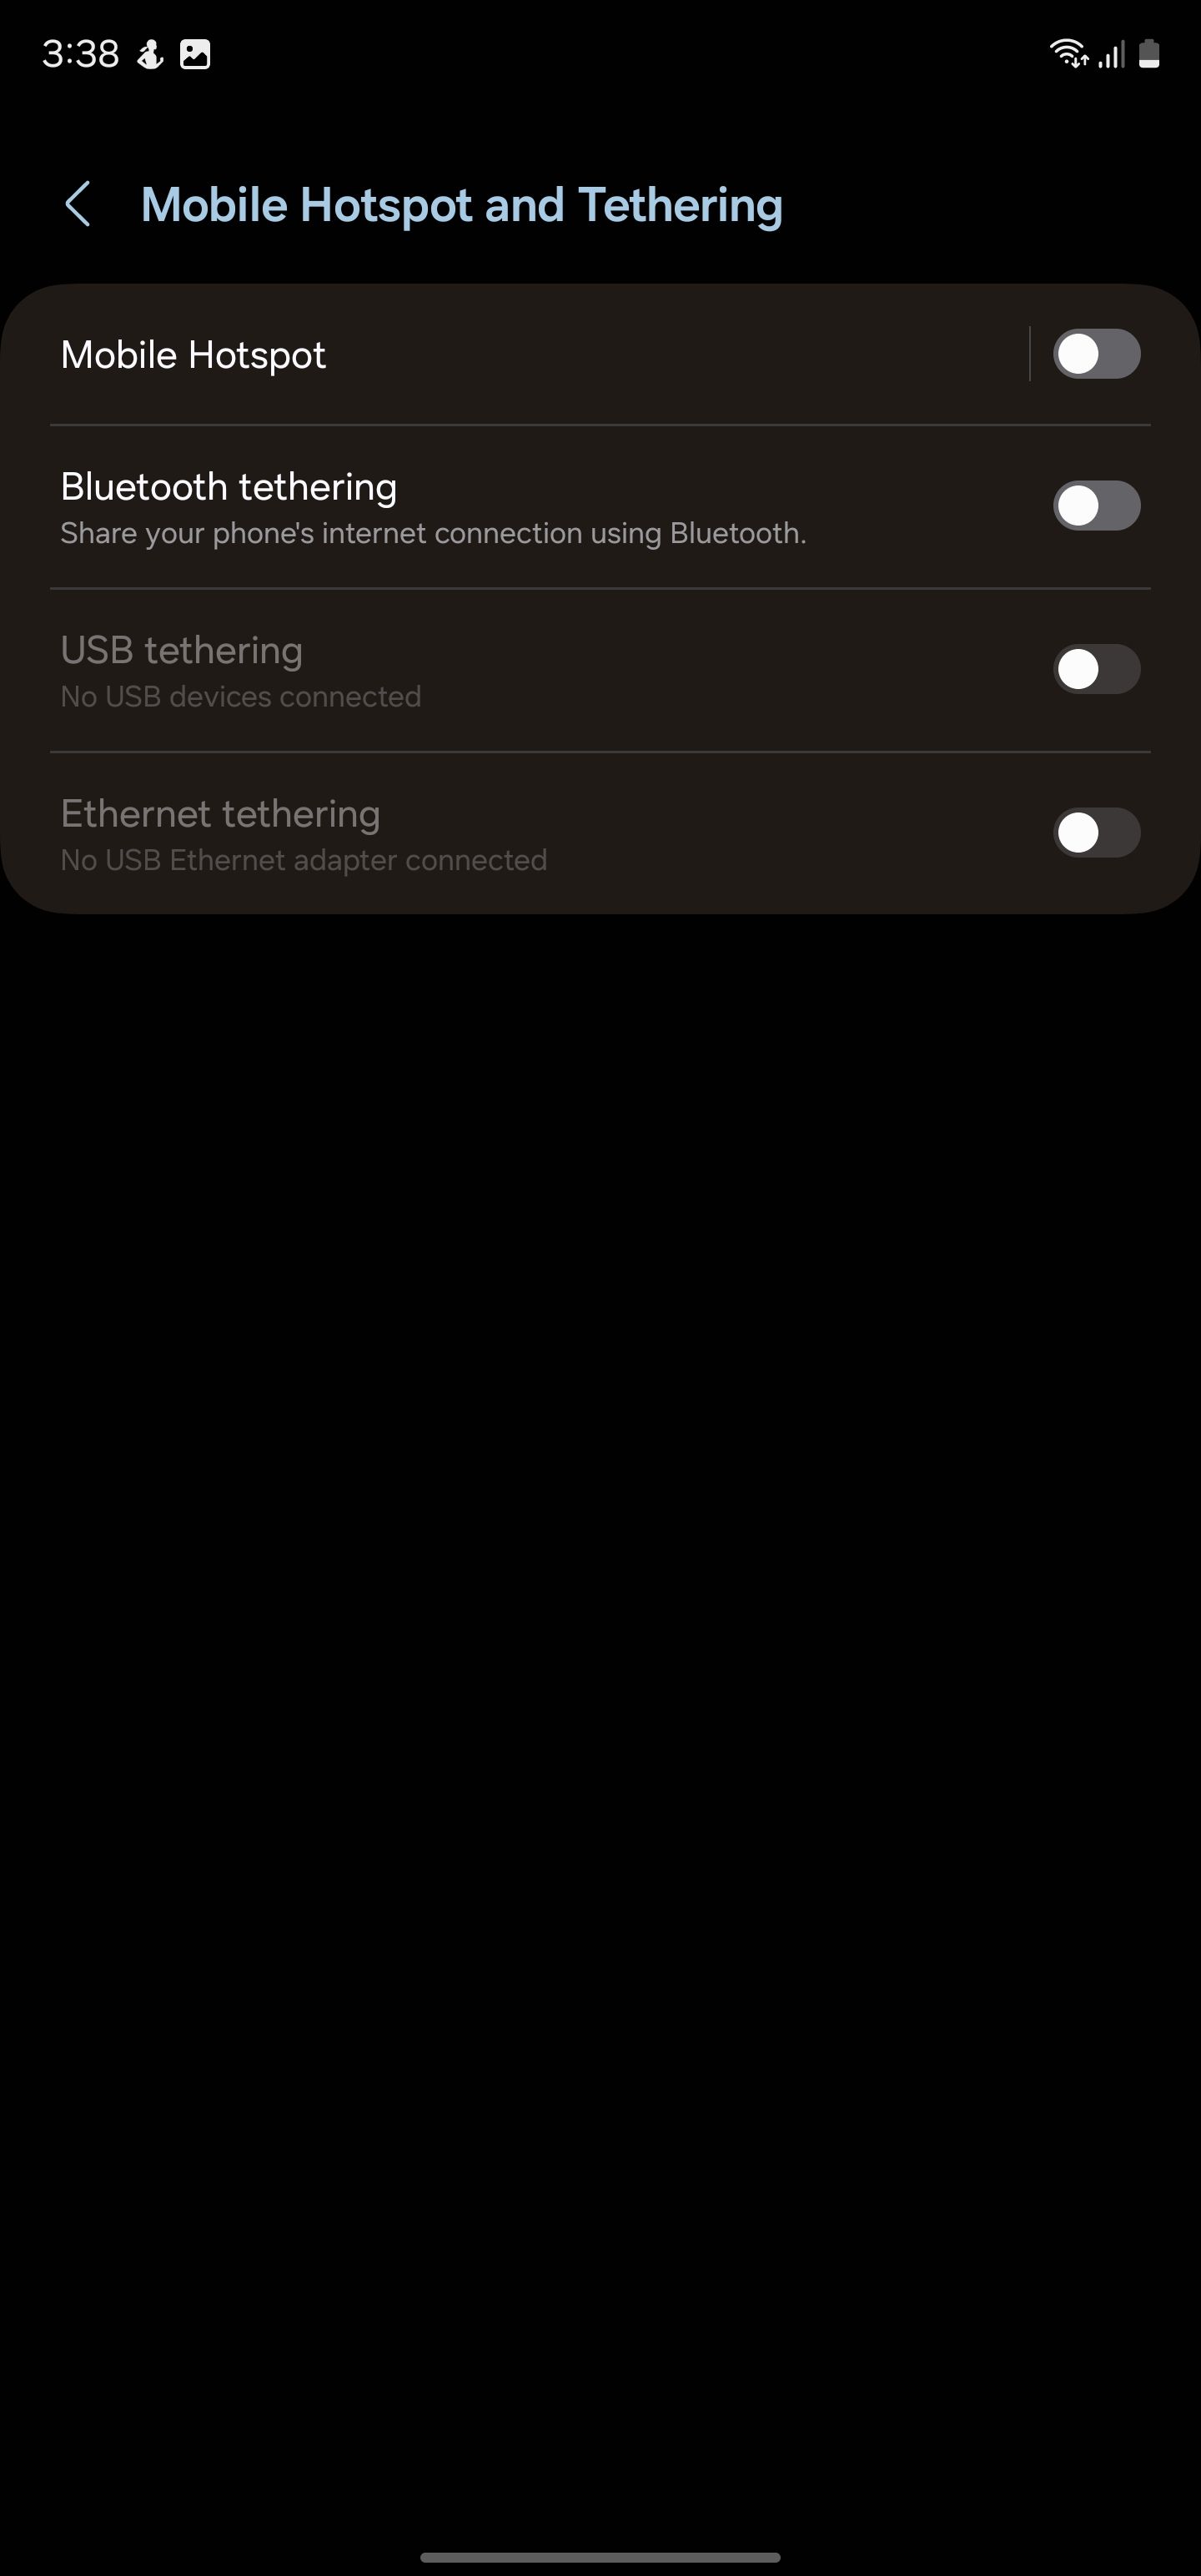 Mobile Hotspot and tethering options in One UI 6 on a Samsung phone